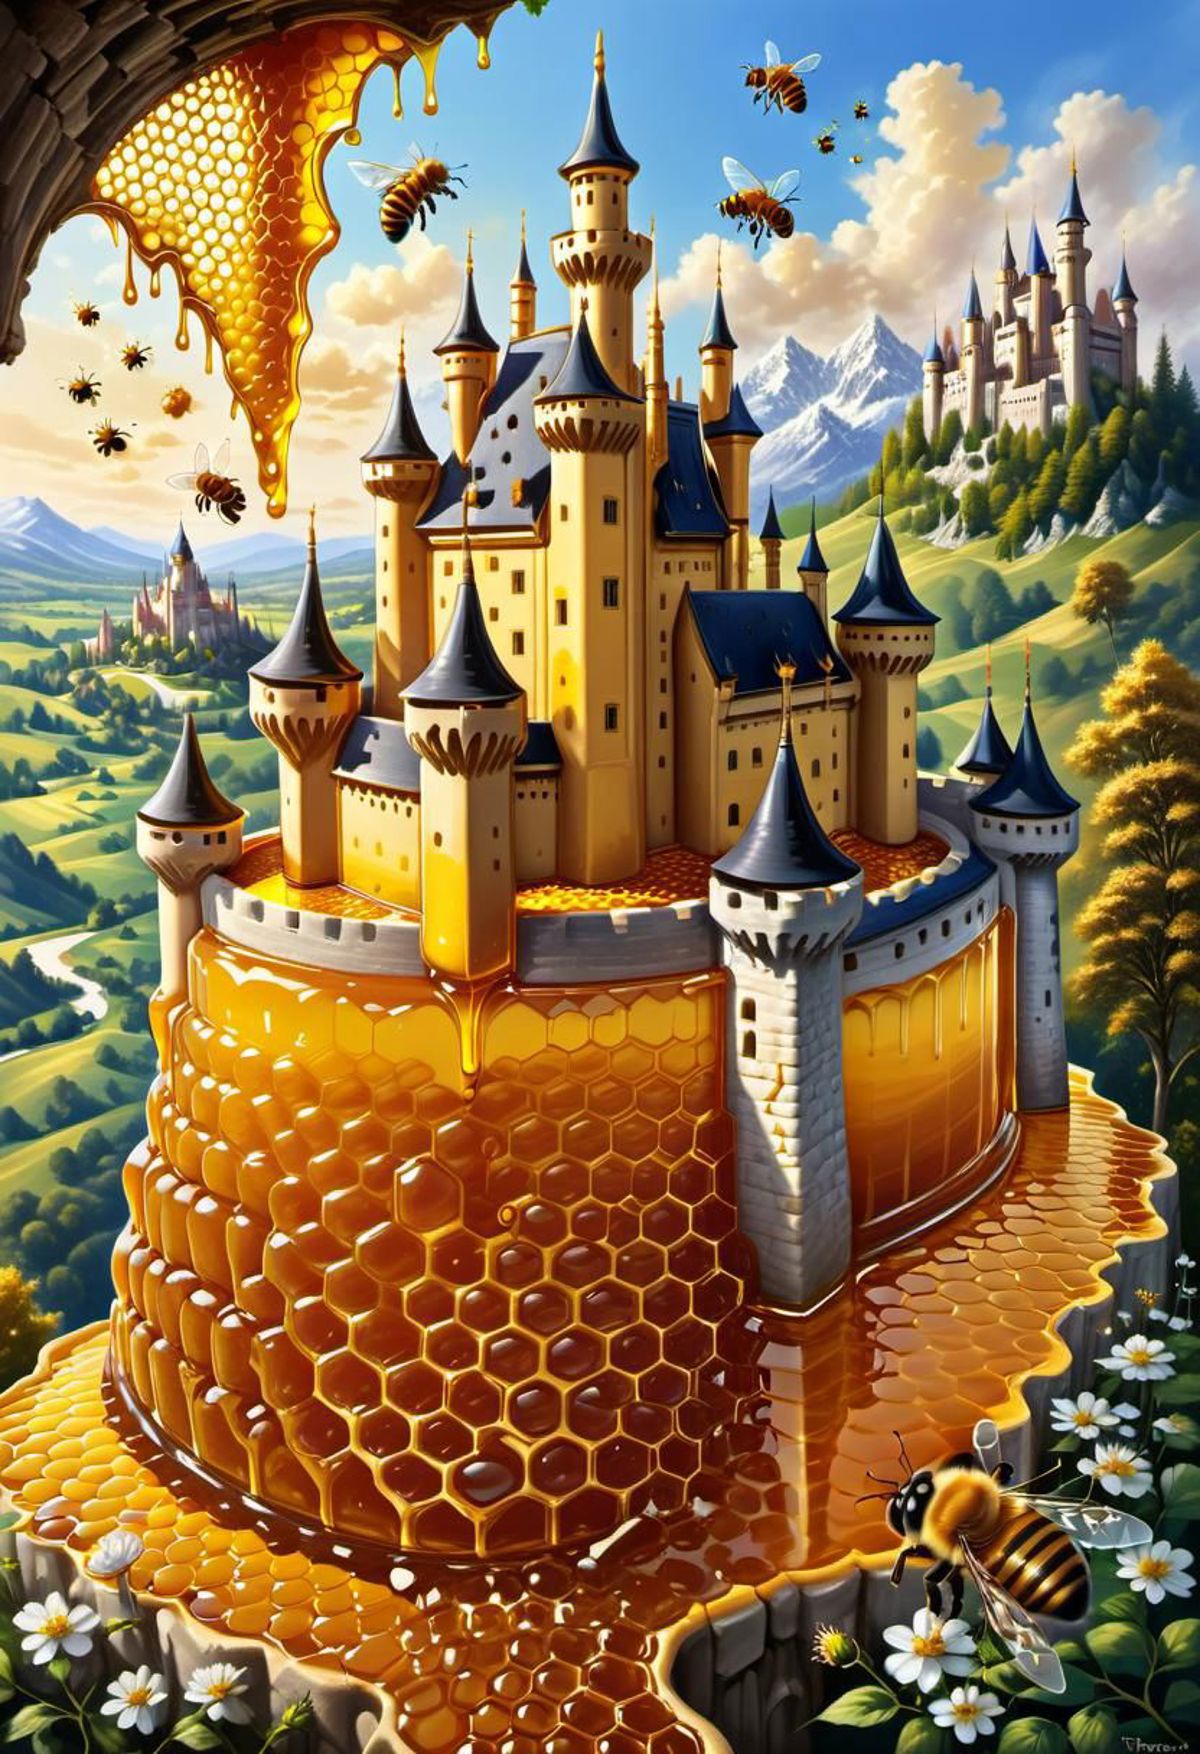 A Castle Made of Honey and Beeswax